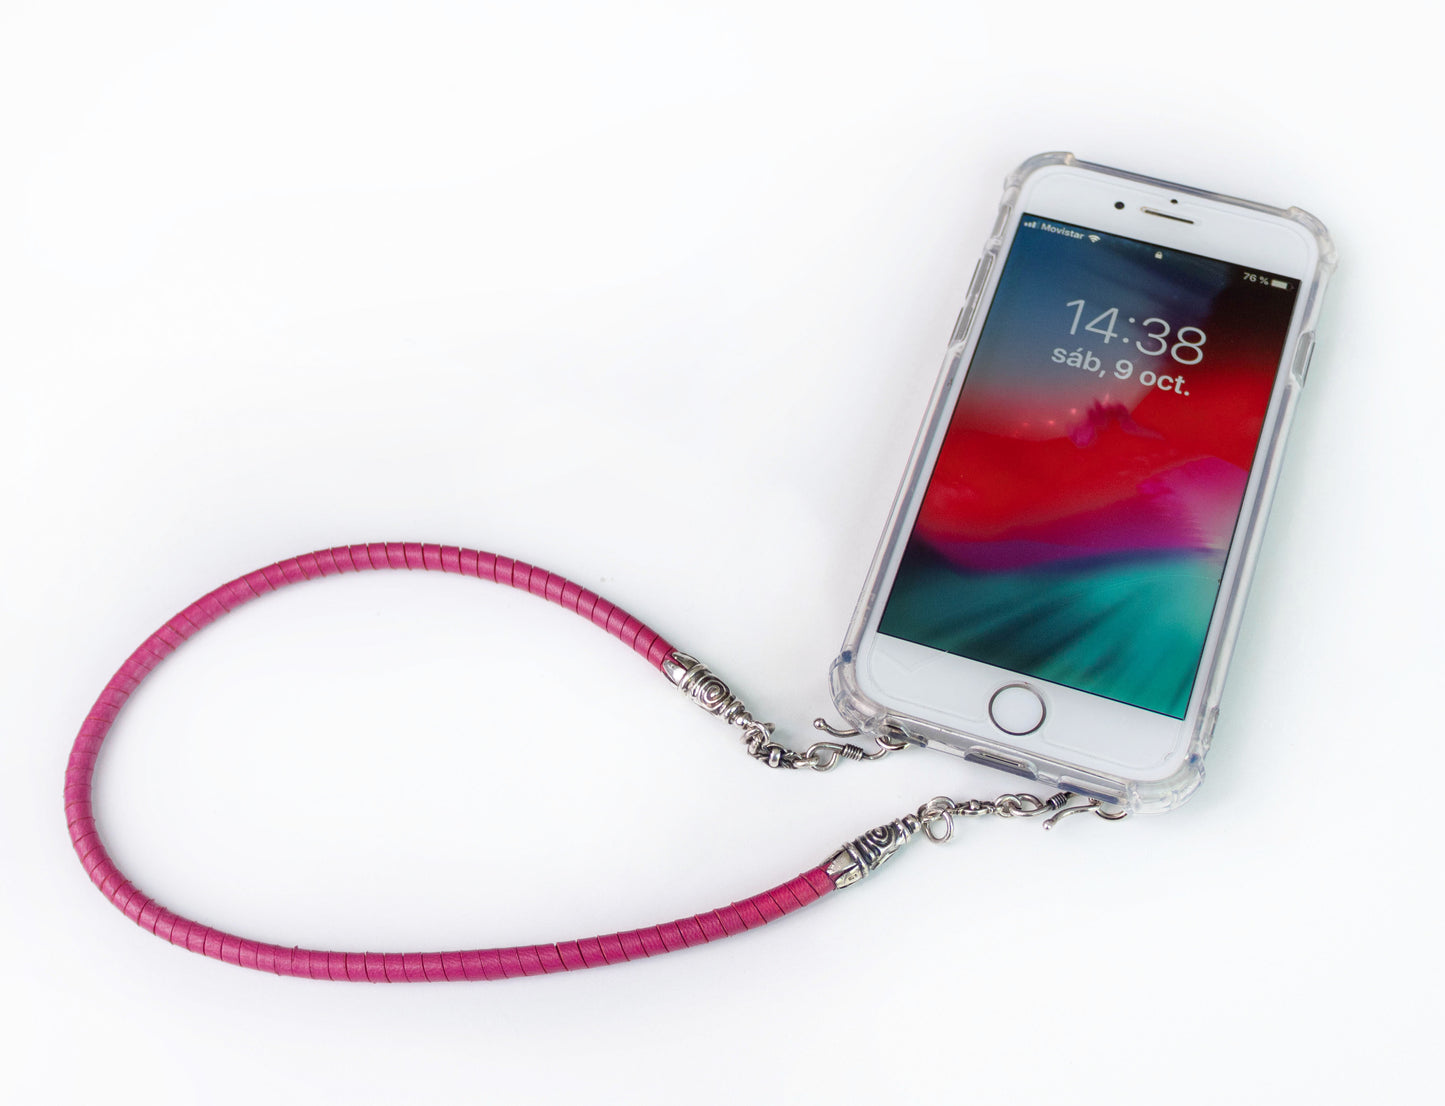 Full-Grain vegetable-tanned Genuine Leather & 925 Sterling Silver Case for iPhone. Hand-braided Fuchsia Spiral Genuine Leather Bracelet/Choker/Strap.- F01